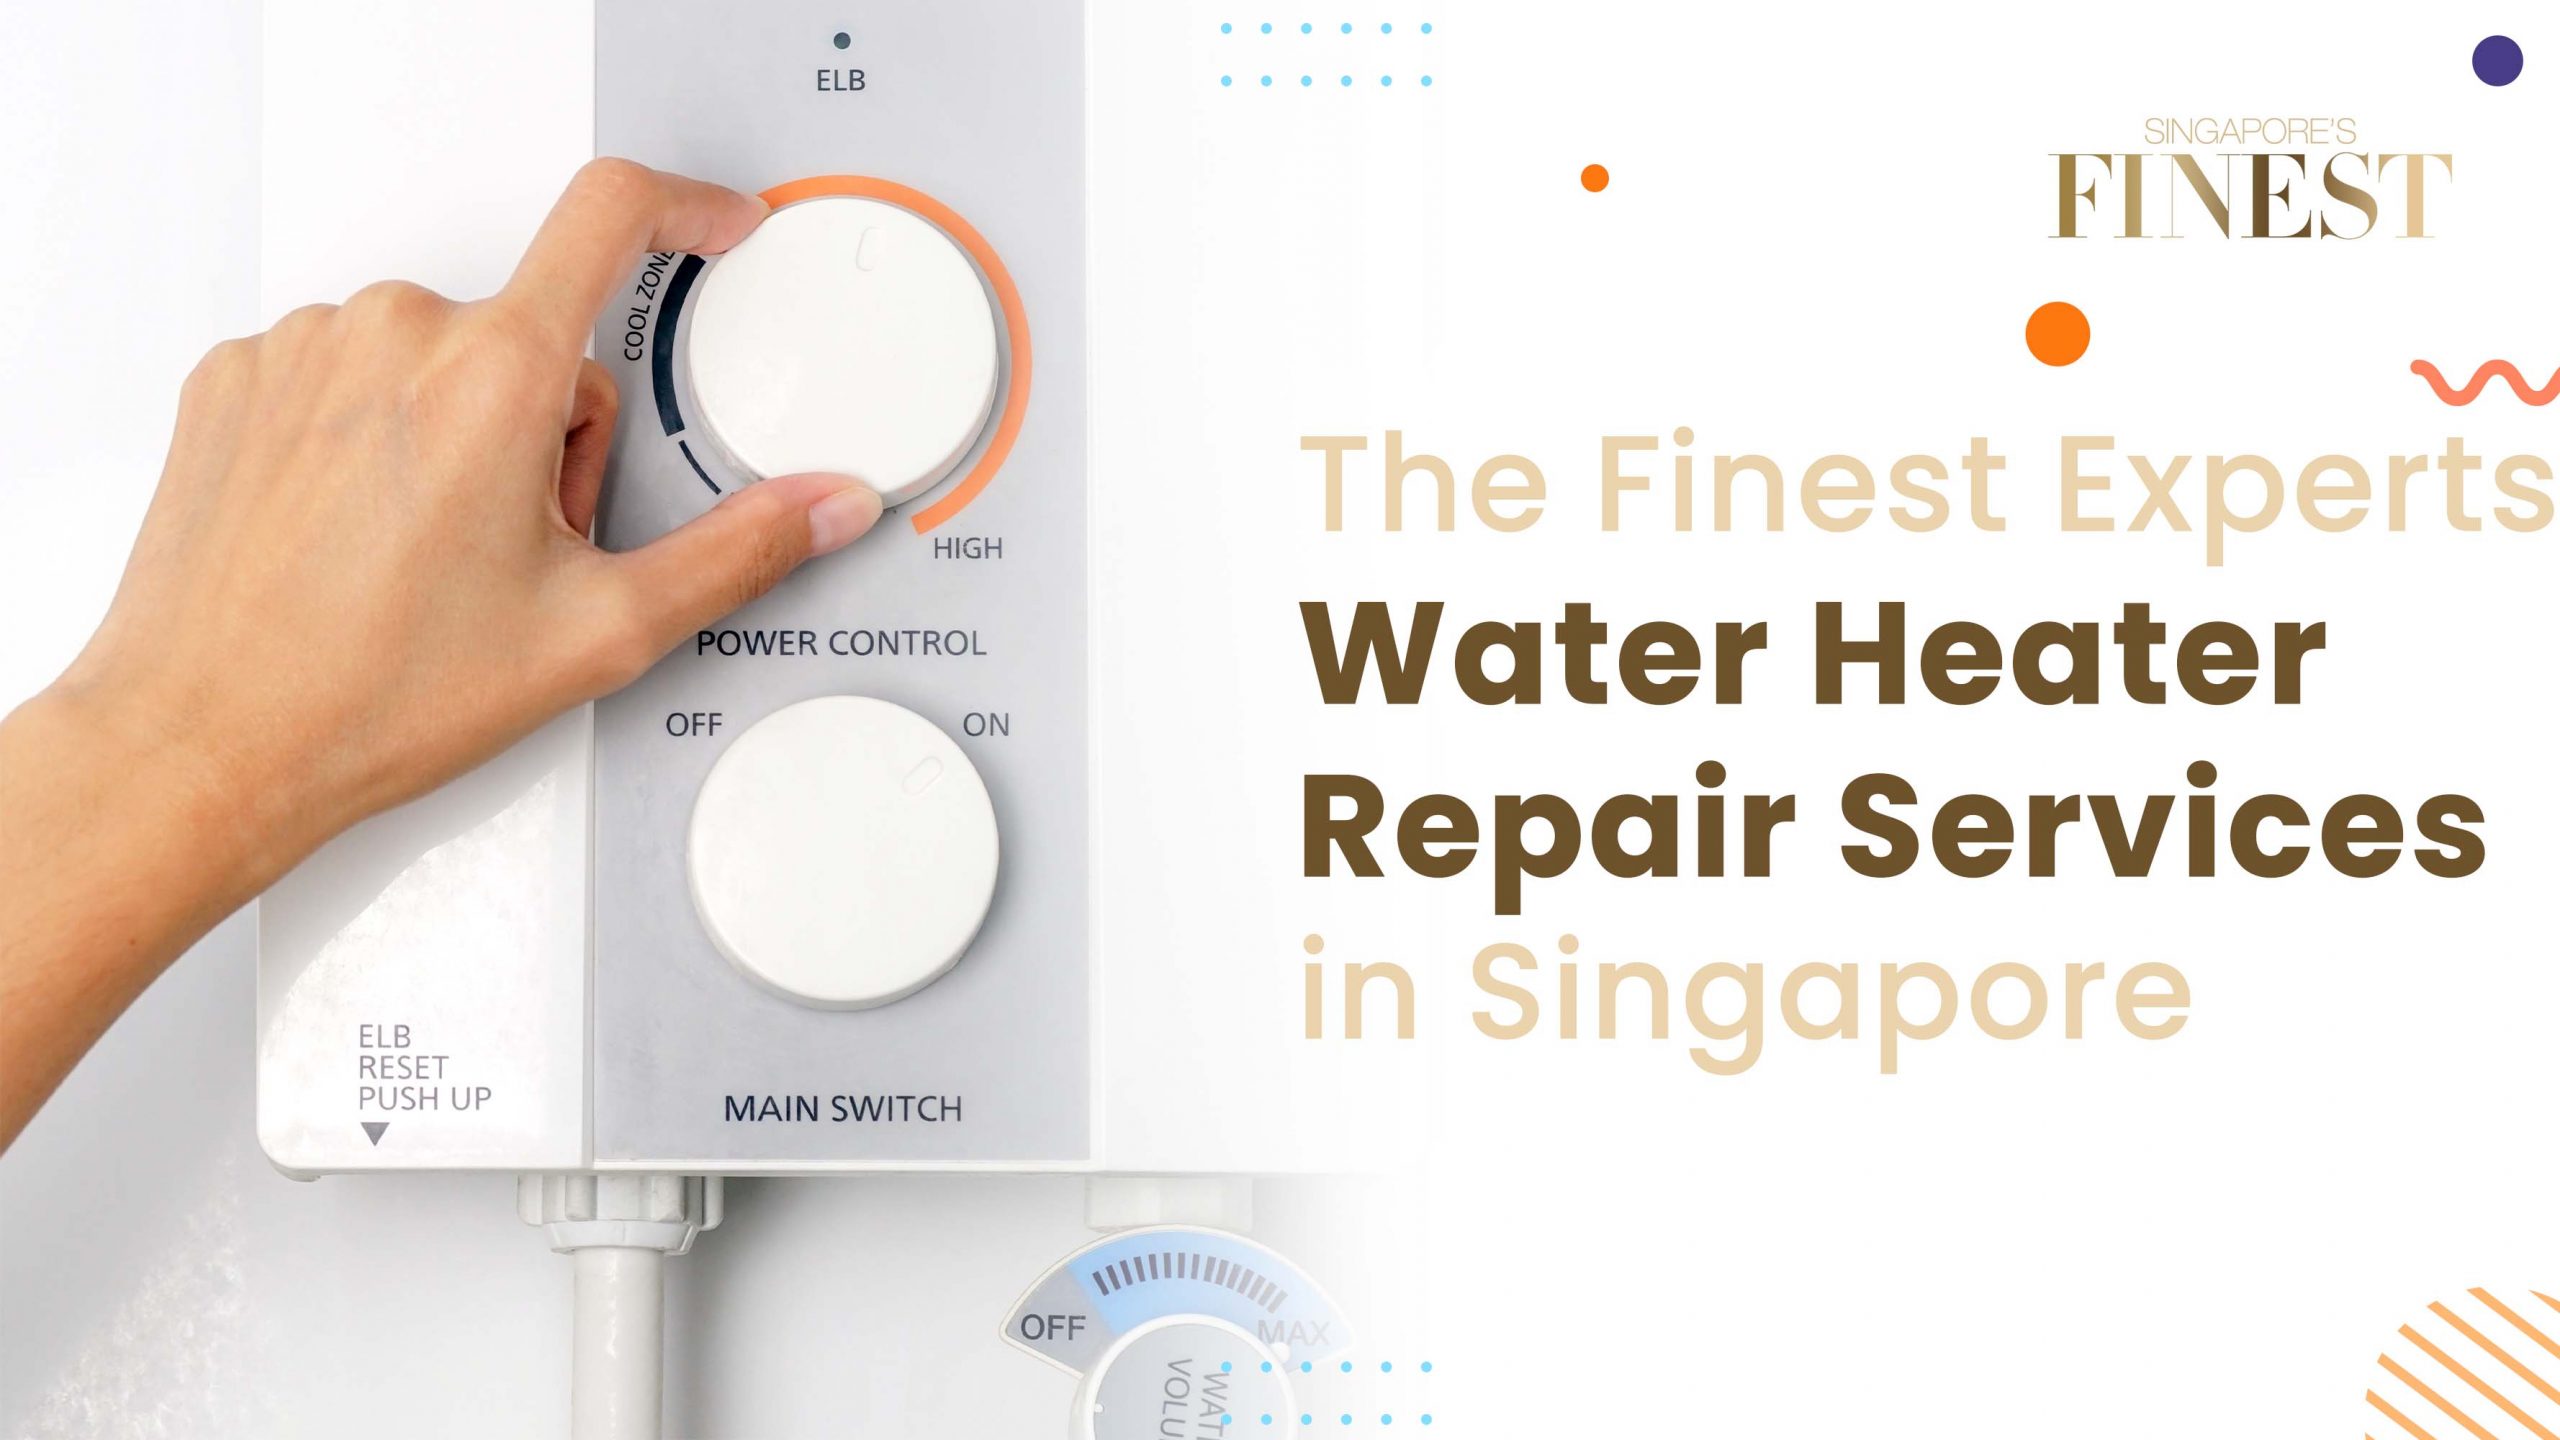 Finest Experts on Water Heater Repair Services in Singapore